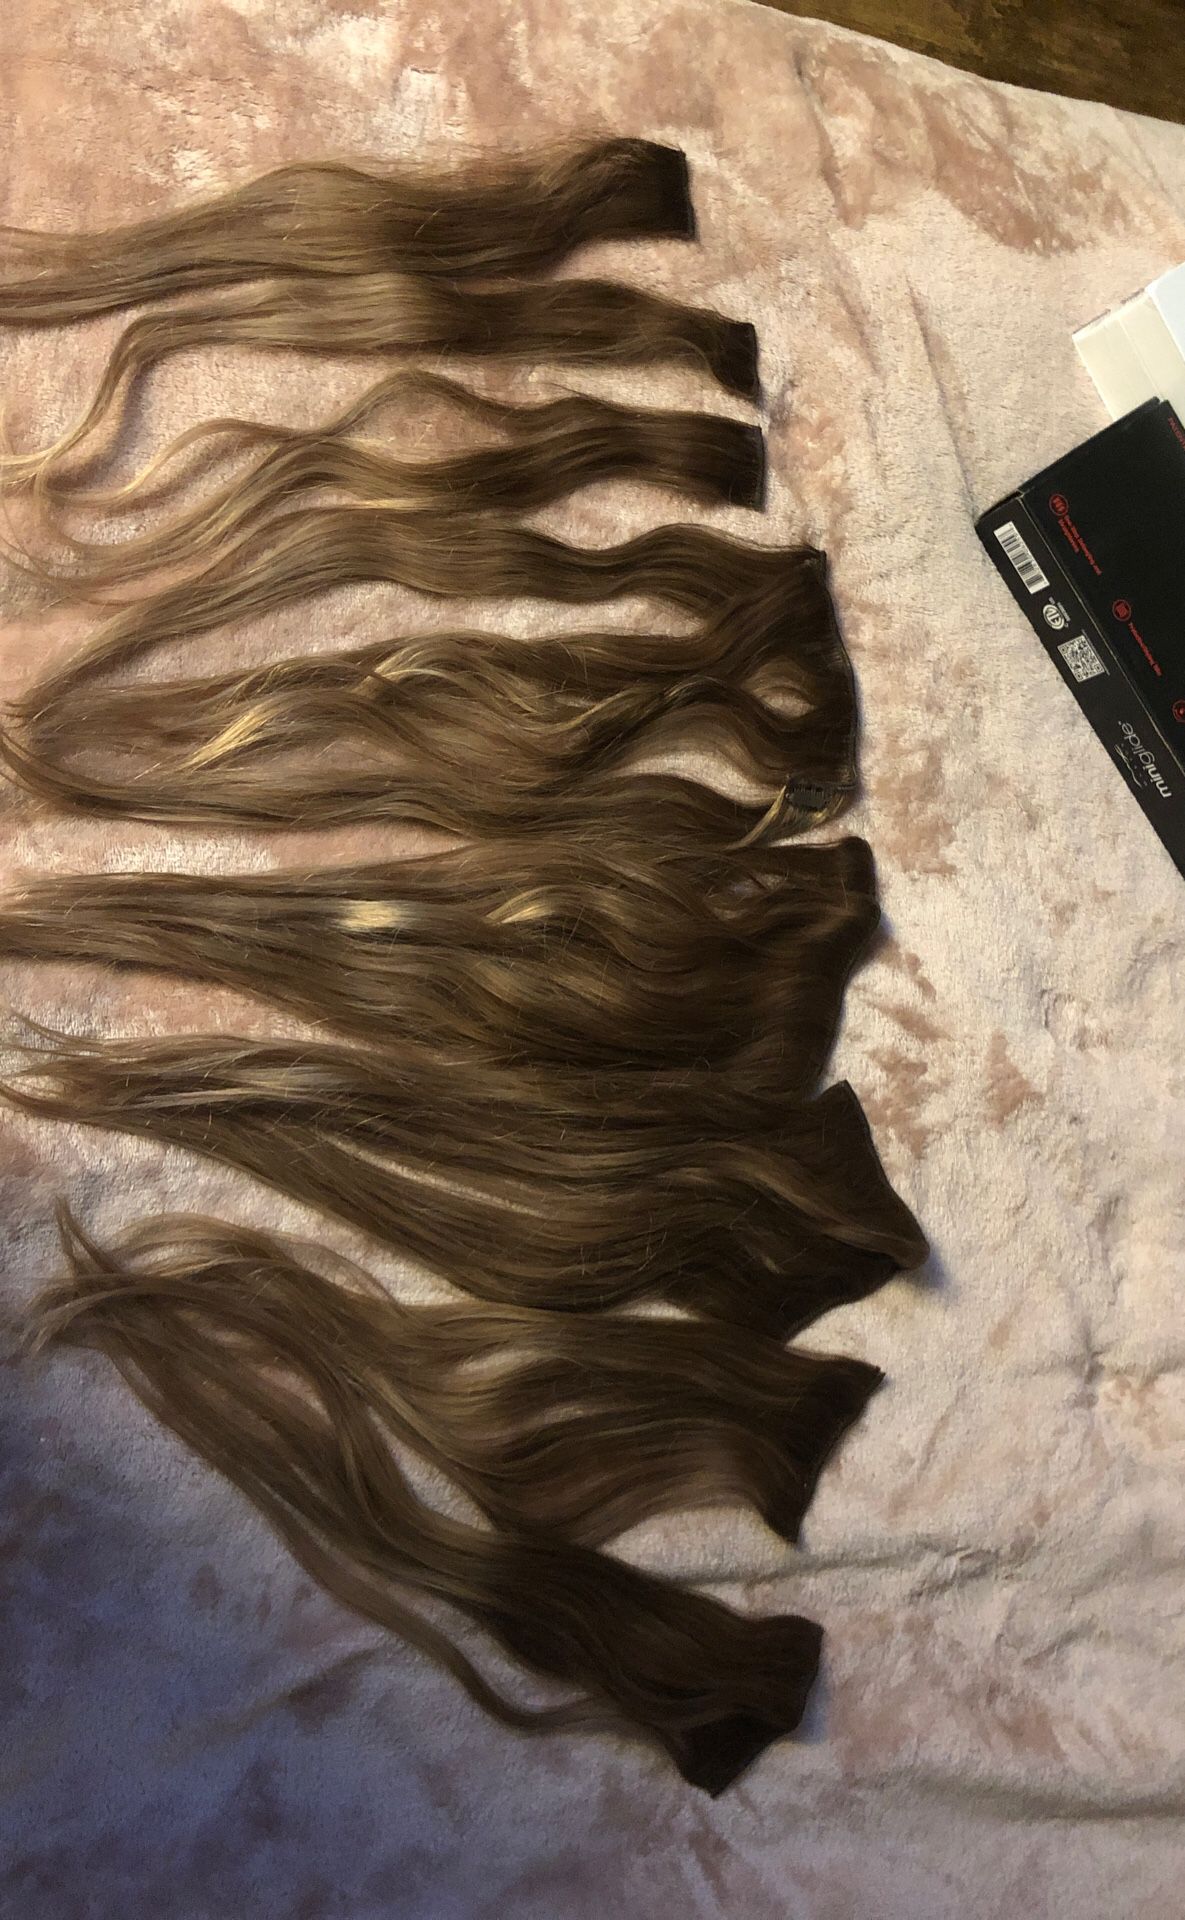 Hair extensions. Remy hair (real hair) 9 piece clip in. 16 inch price dropped again! Make offer, more discount if bought today!